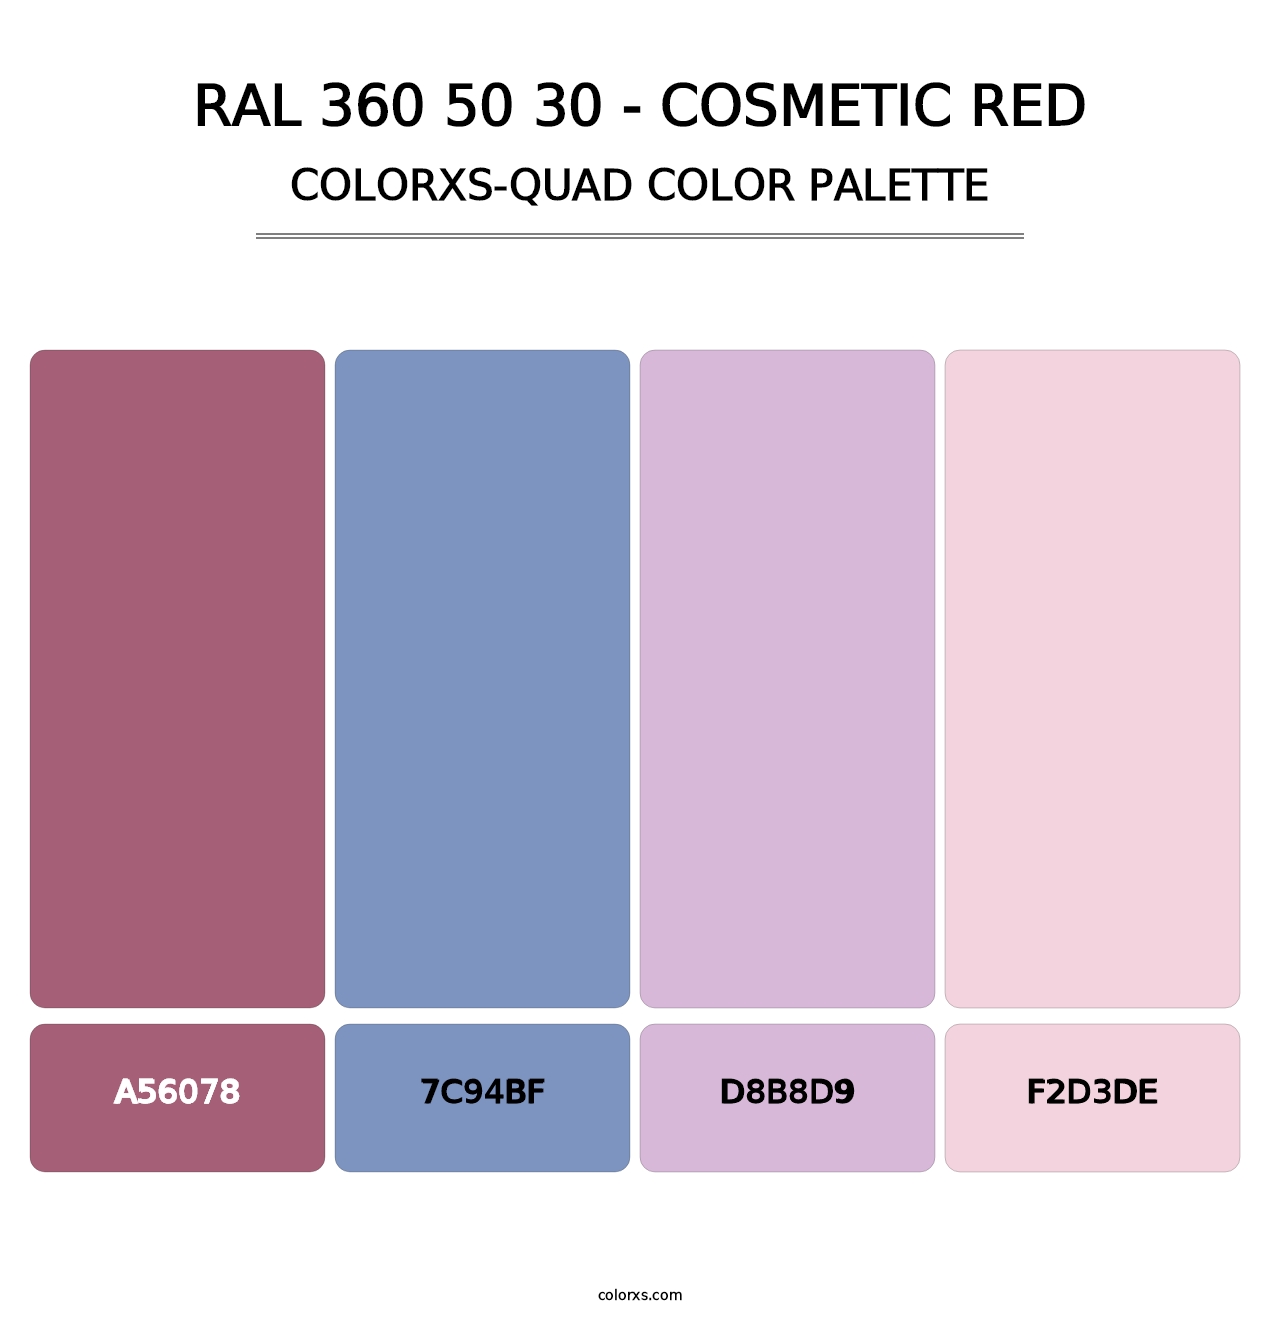 RAL 360 50 30 - Cosmetic Red - Colorxs Quad Palette